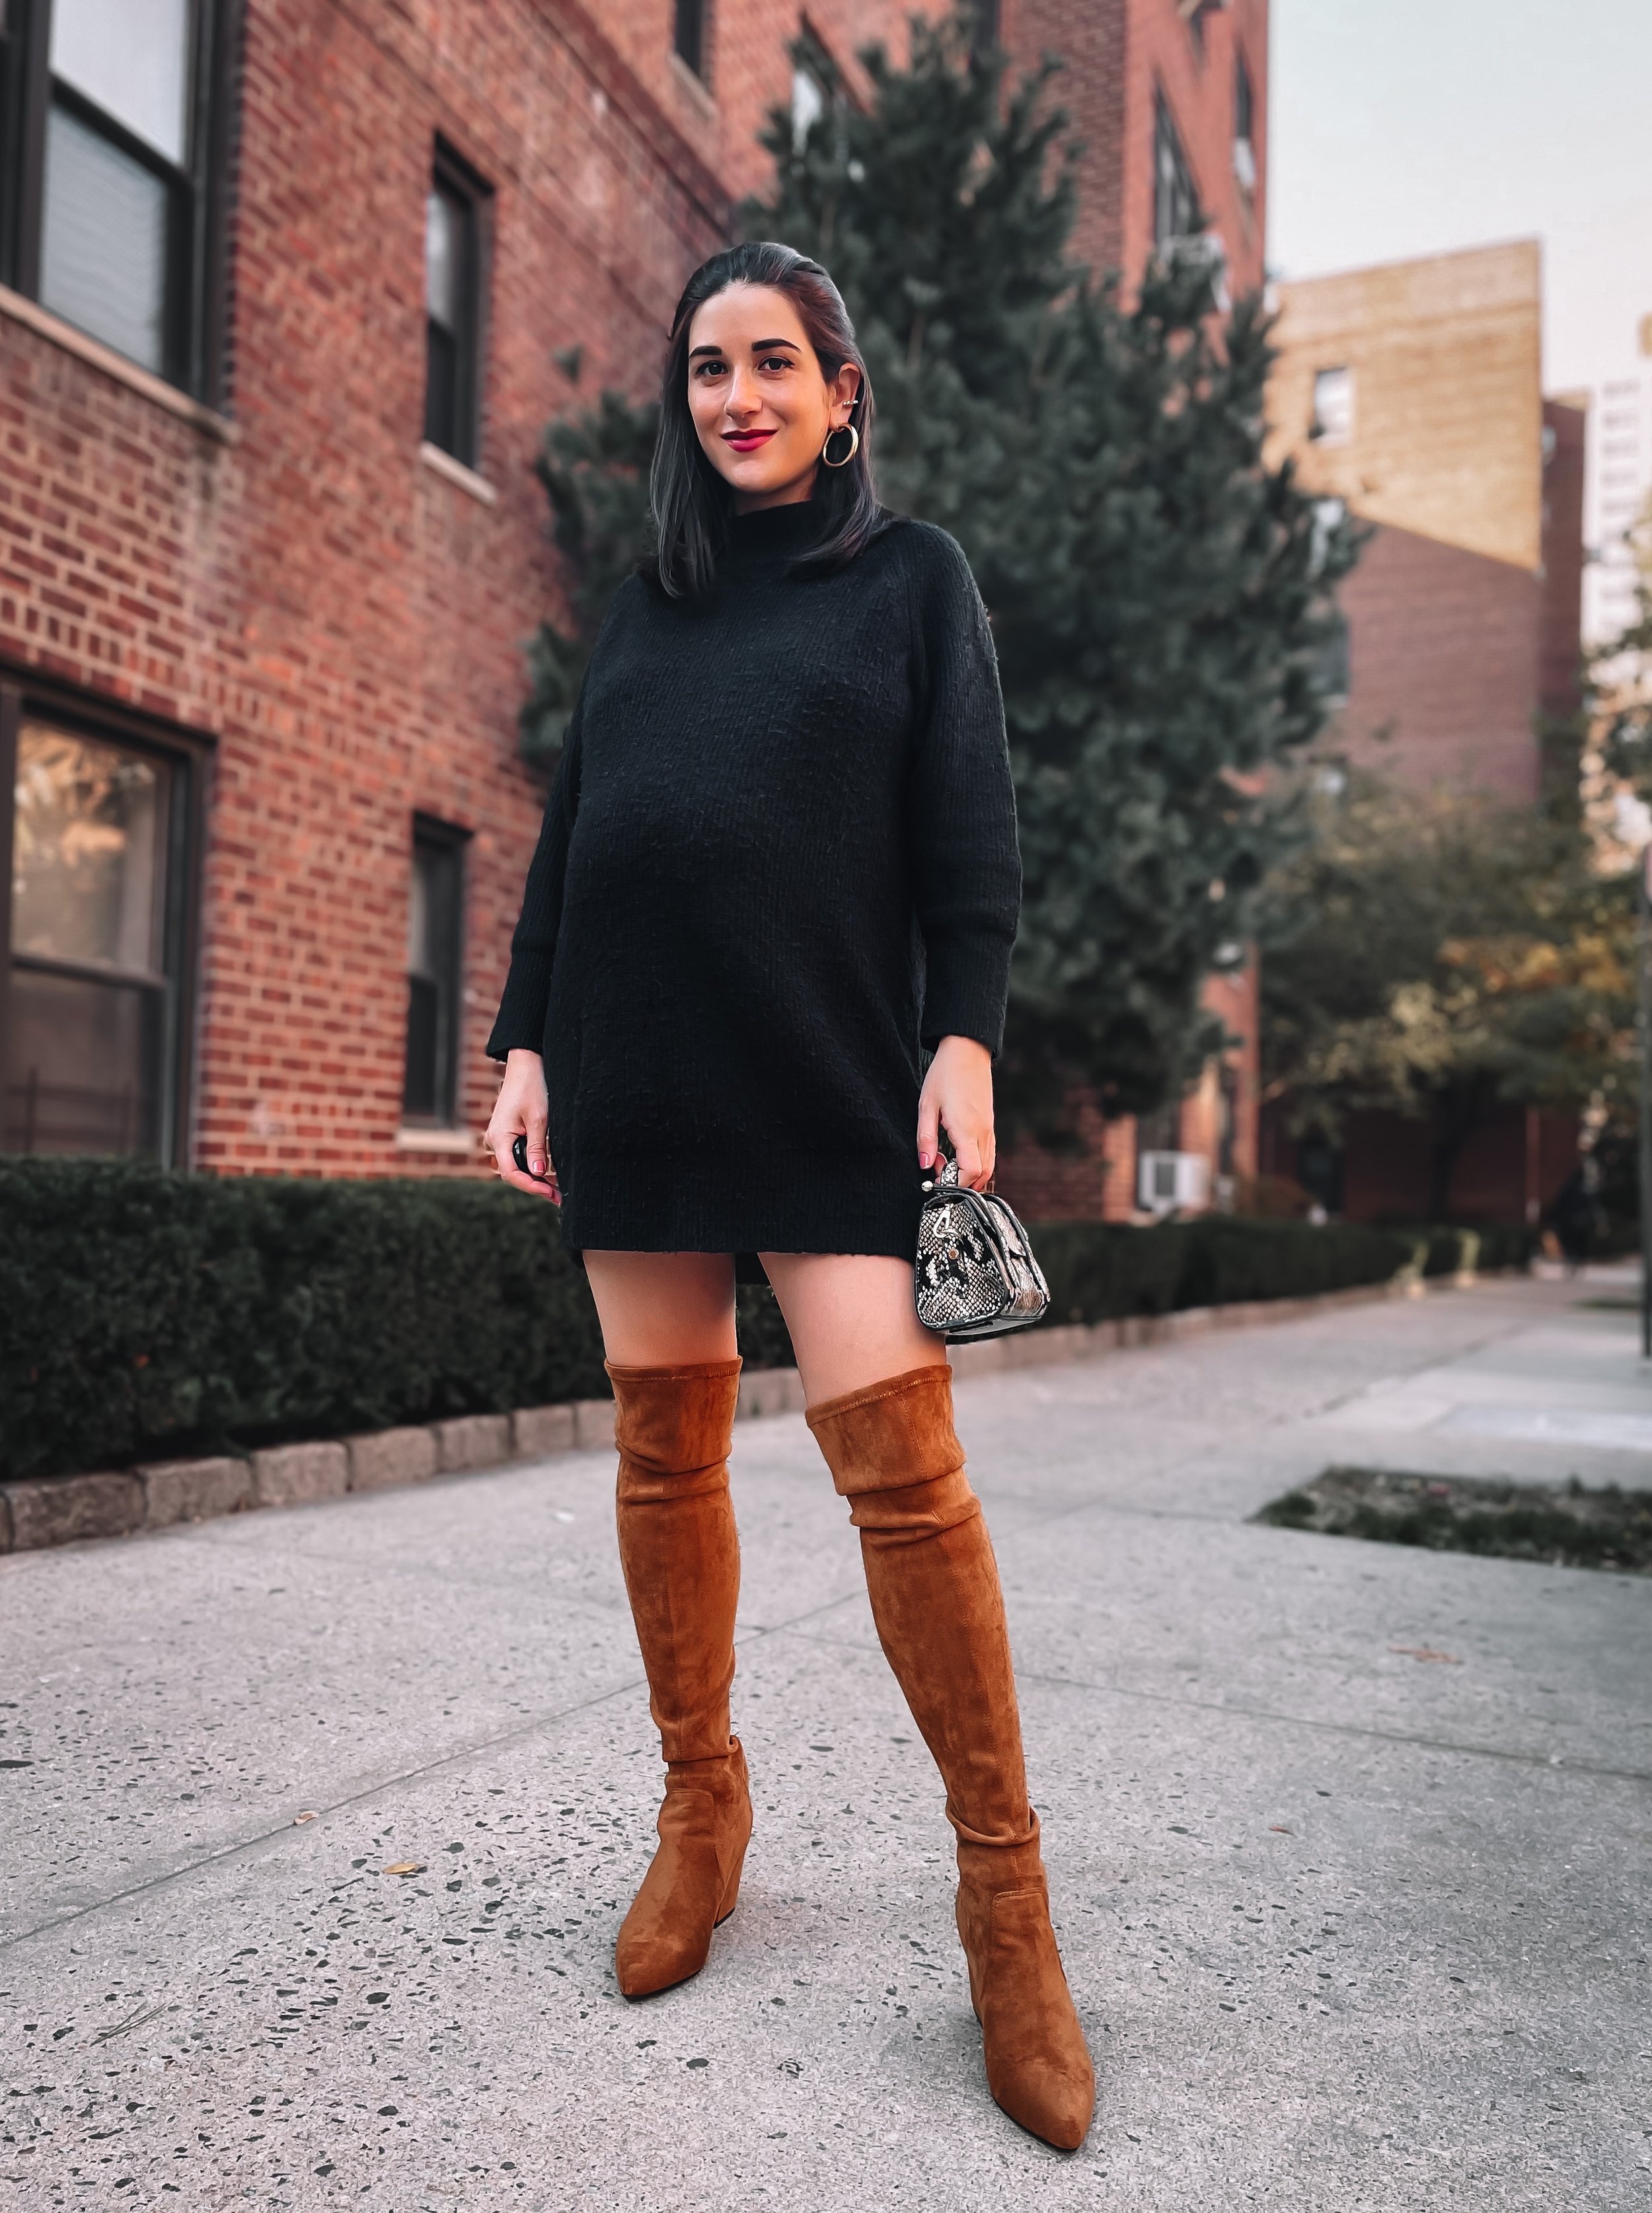 Black Sweater Dress Tan OTK Boots 39 Weeks Pregnant Esther Santer NYC Street Style Blogger Nordstrom Topshop Gold Hoop Earrings Over The Knee Boots Goodnight Macraoon Bump Friendly Pregnancy Fashion IVF Winter Strathberry Mini Bag Women Expecting Mom.JPG